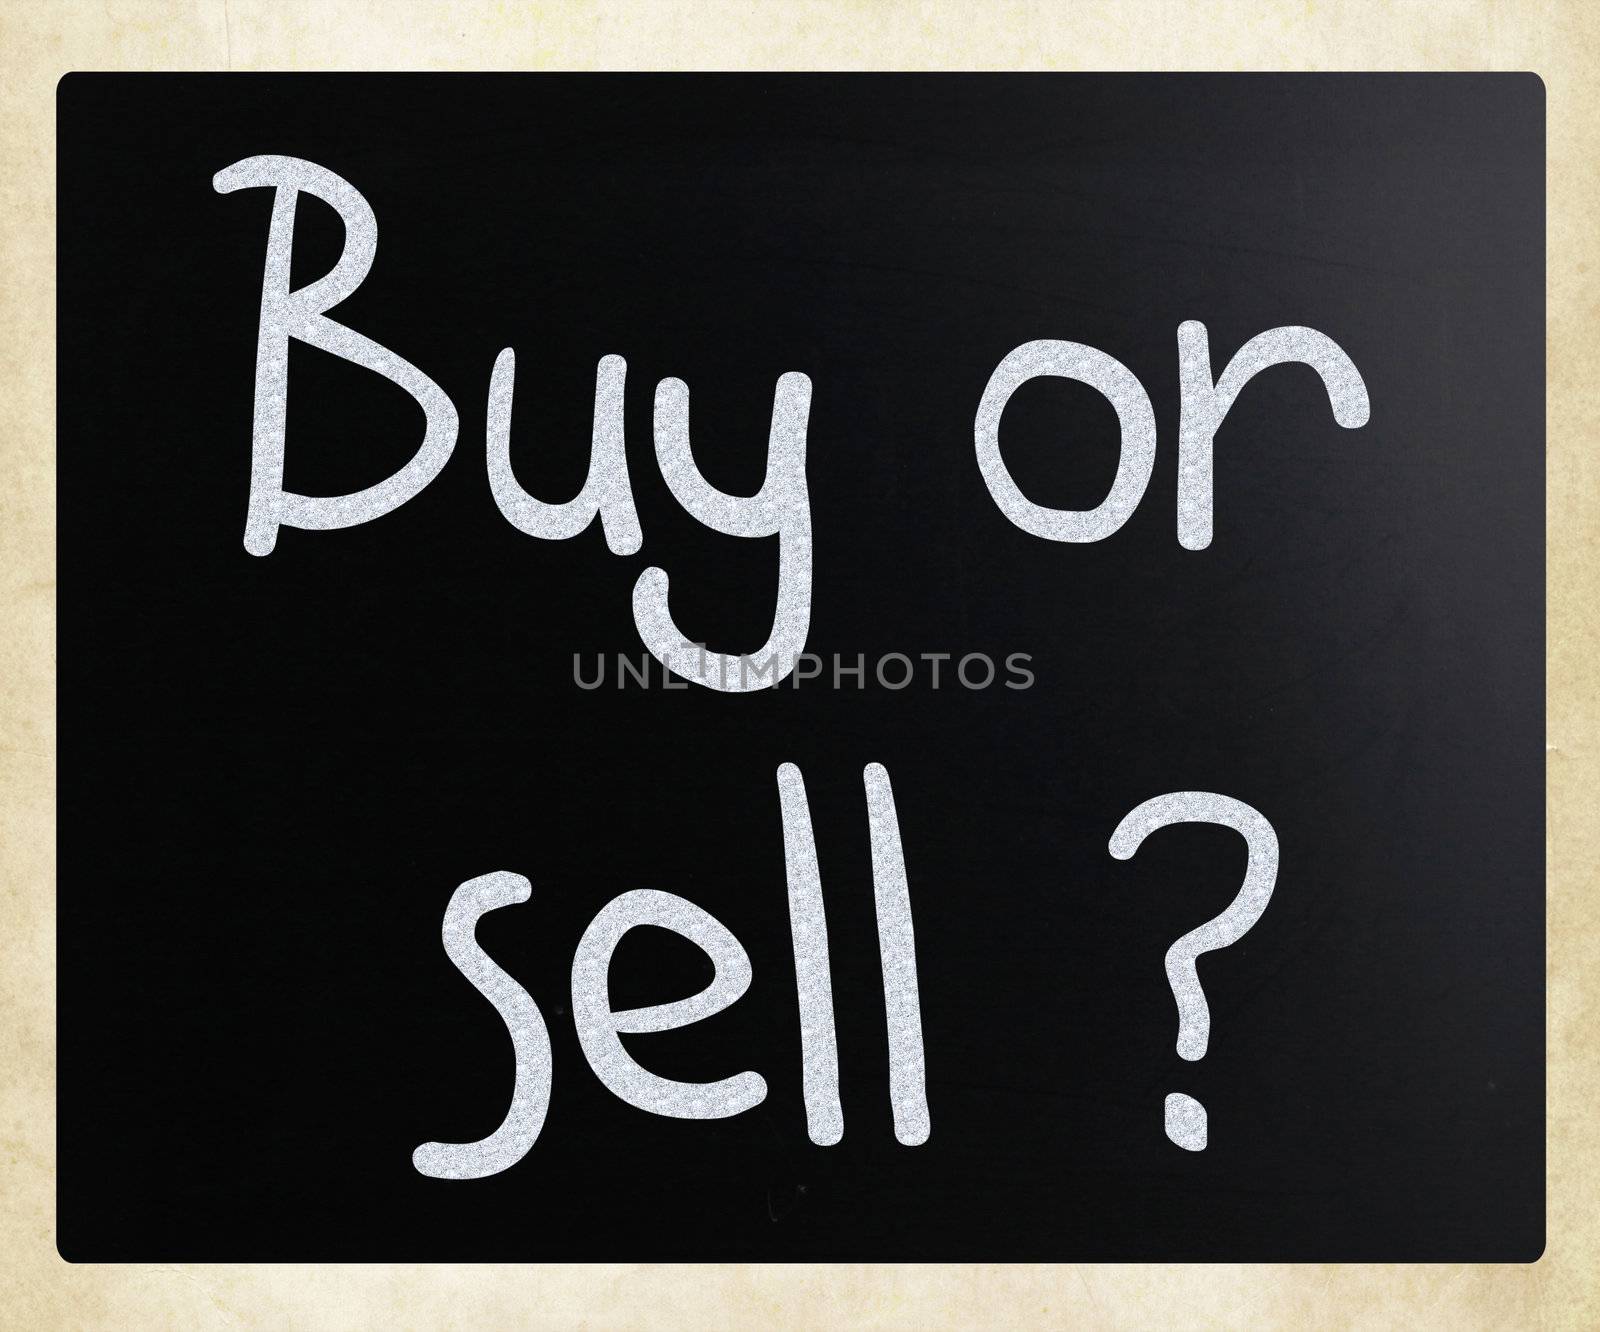 "Buy or sell" handwritten with white chalk on a blackboard.